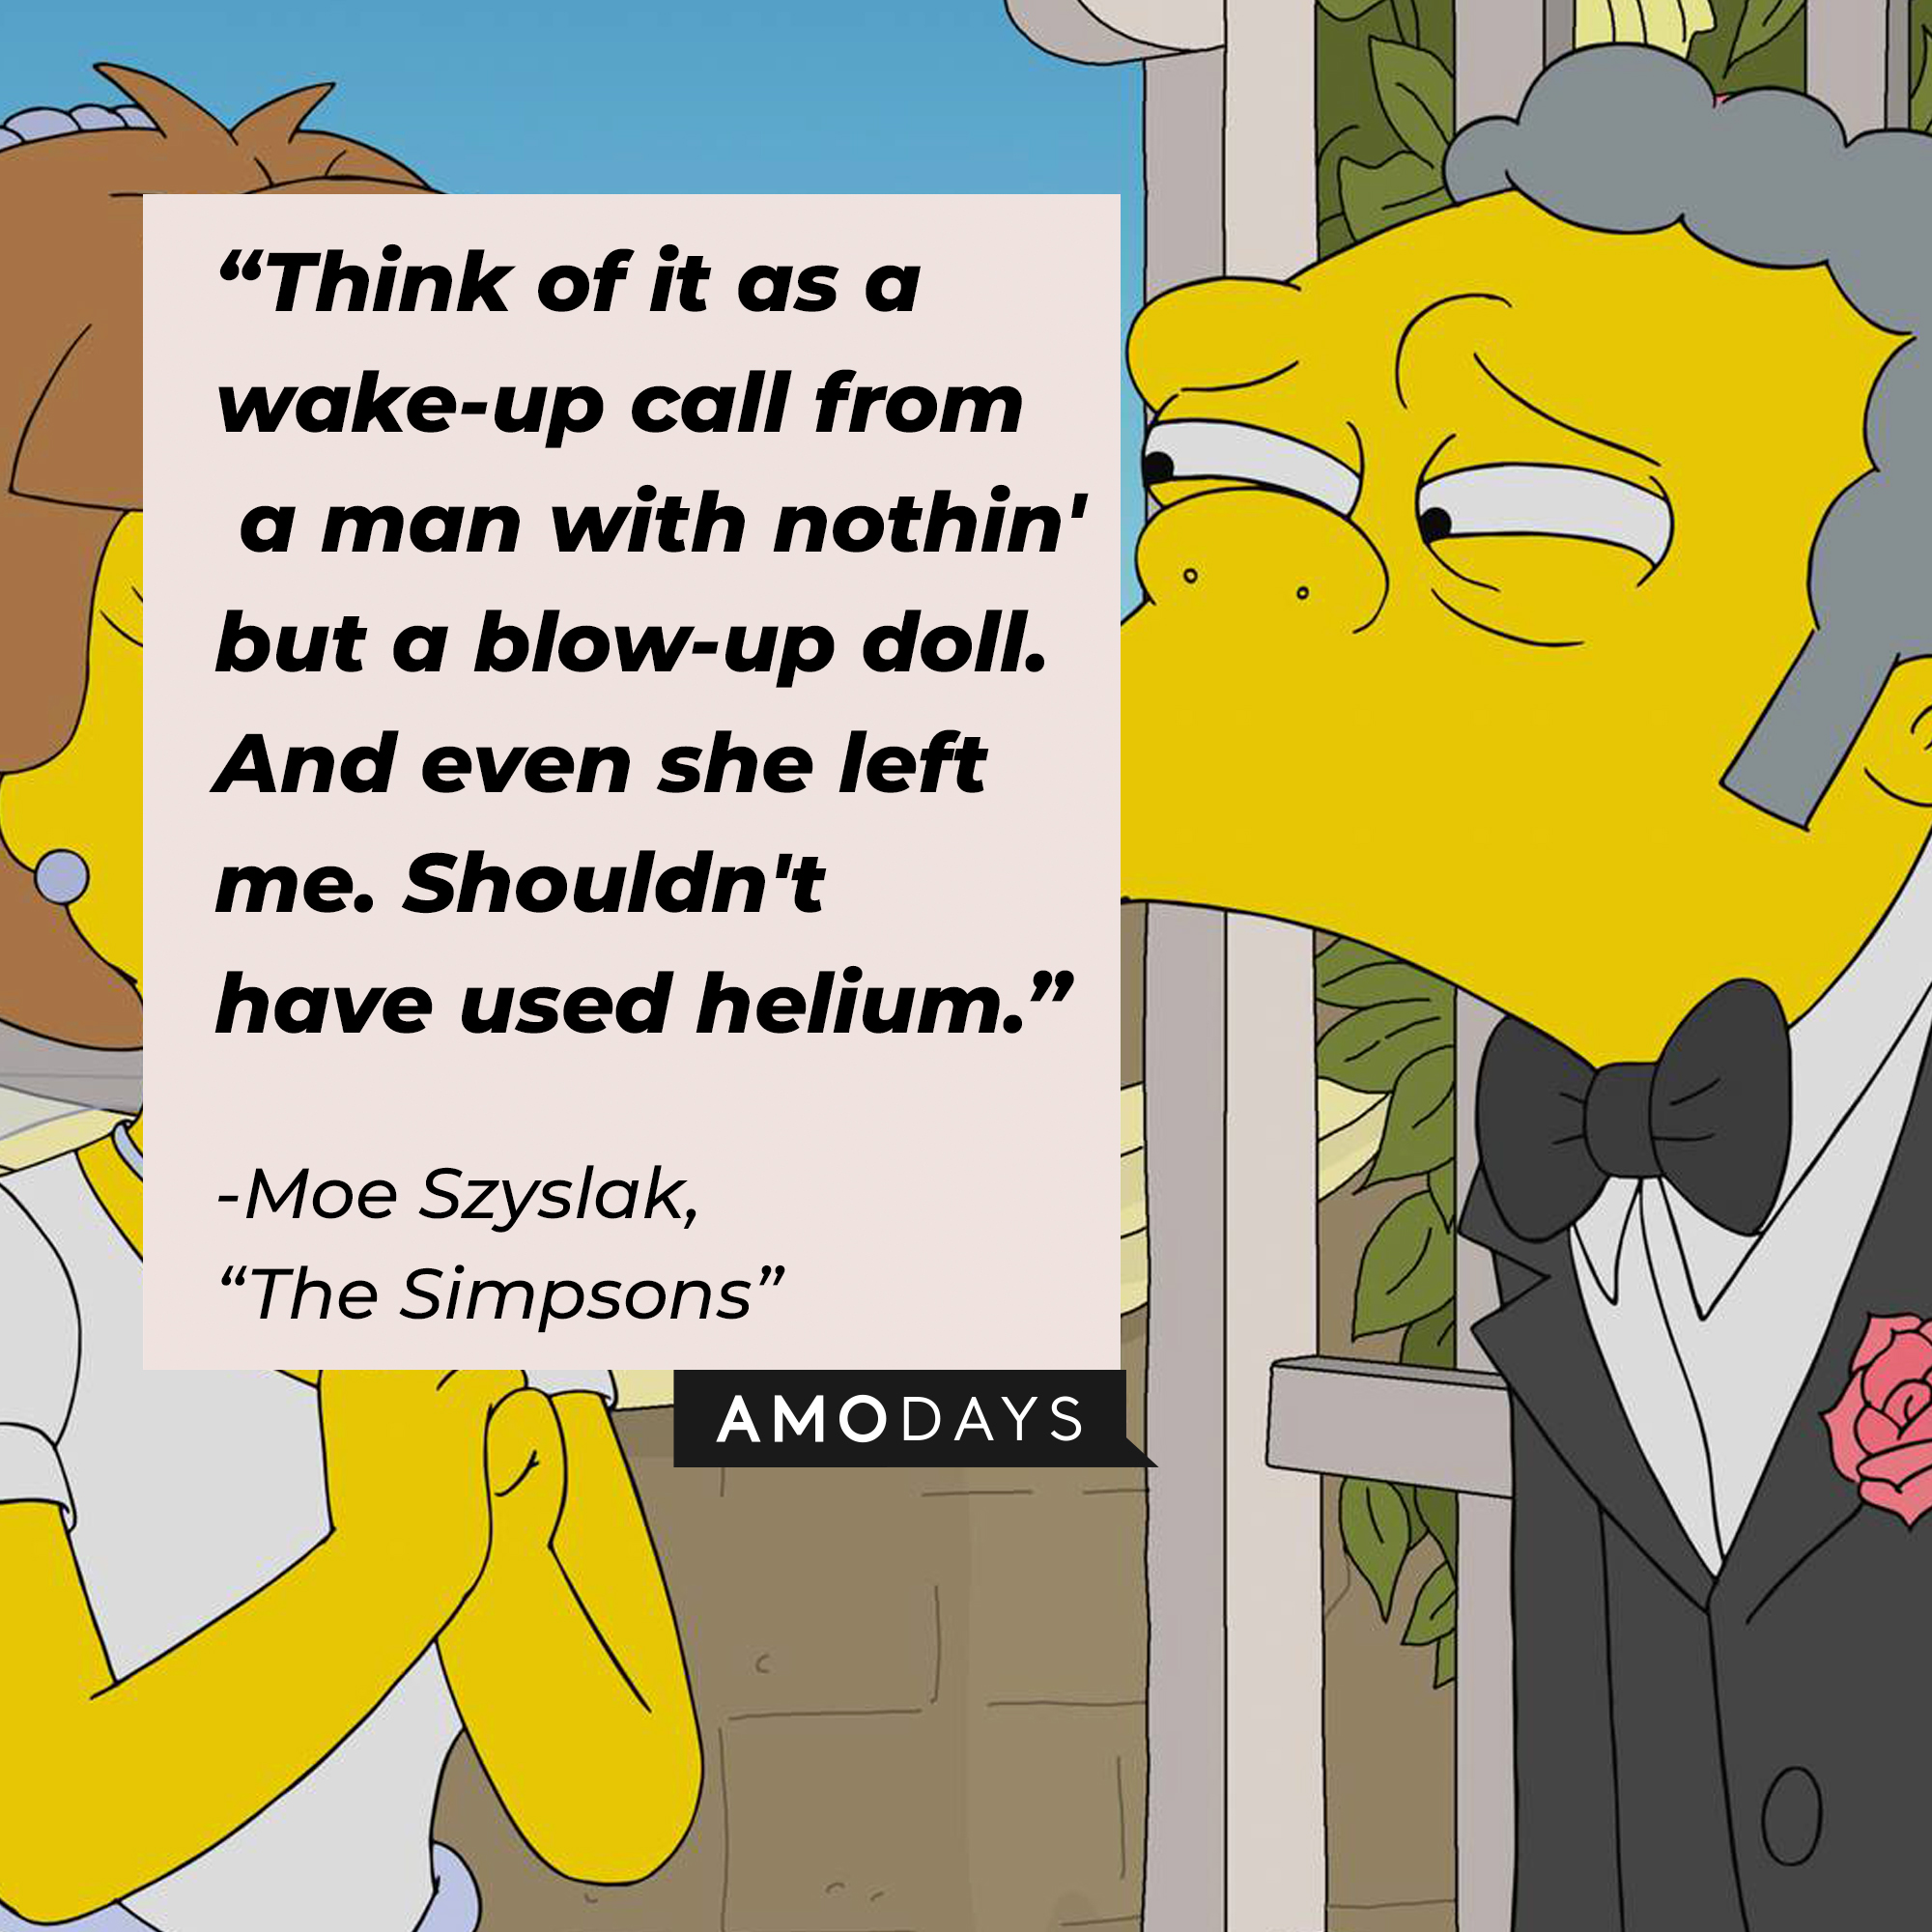 Image of Moe Szyslak with his quote from "The Simpsons:" "Think of it as a wake-up call from a man with nothin' but a blow-up doll. And even she left me. Shouldn't have used helium." | Source: Facebook.com/TheSimpsons